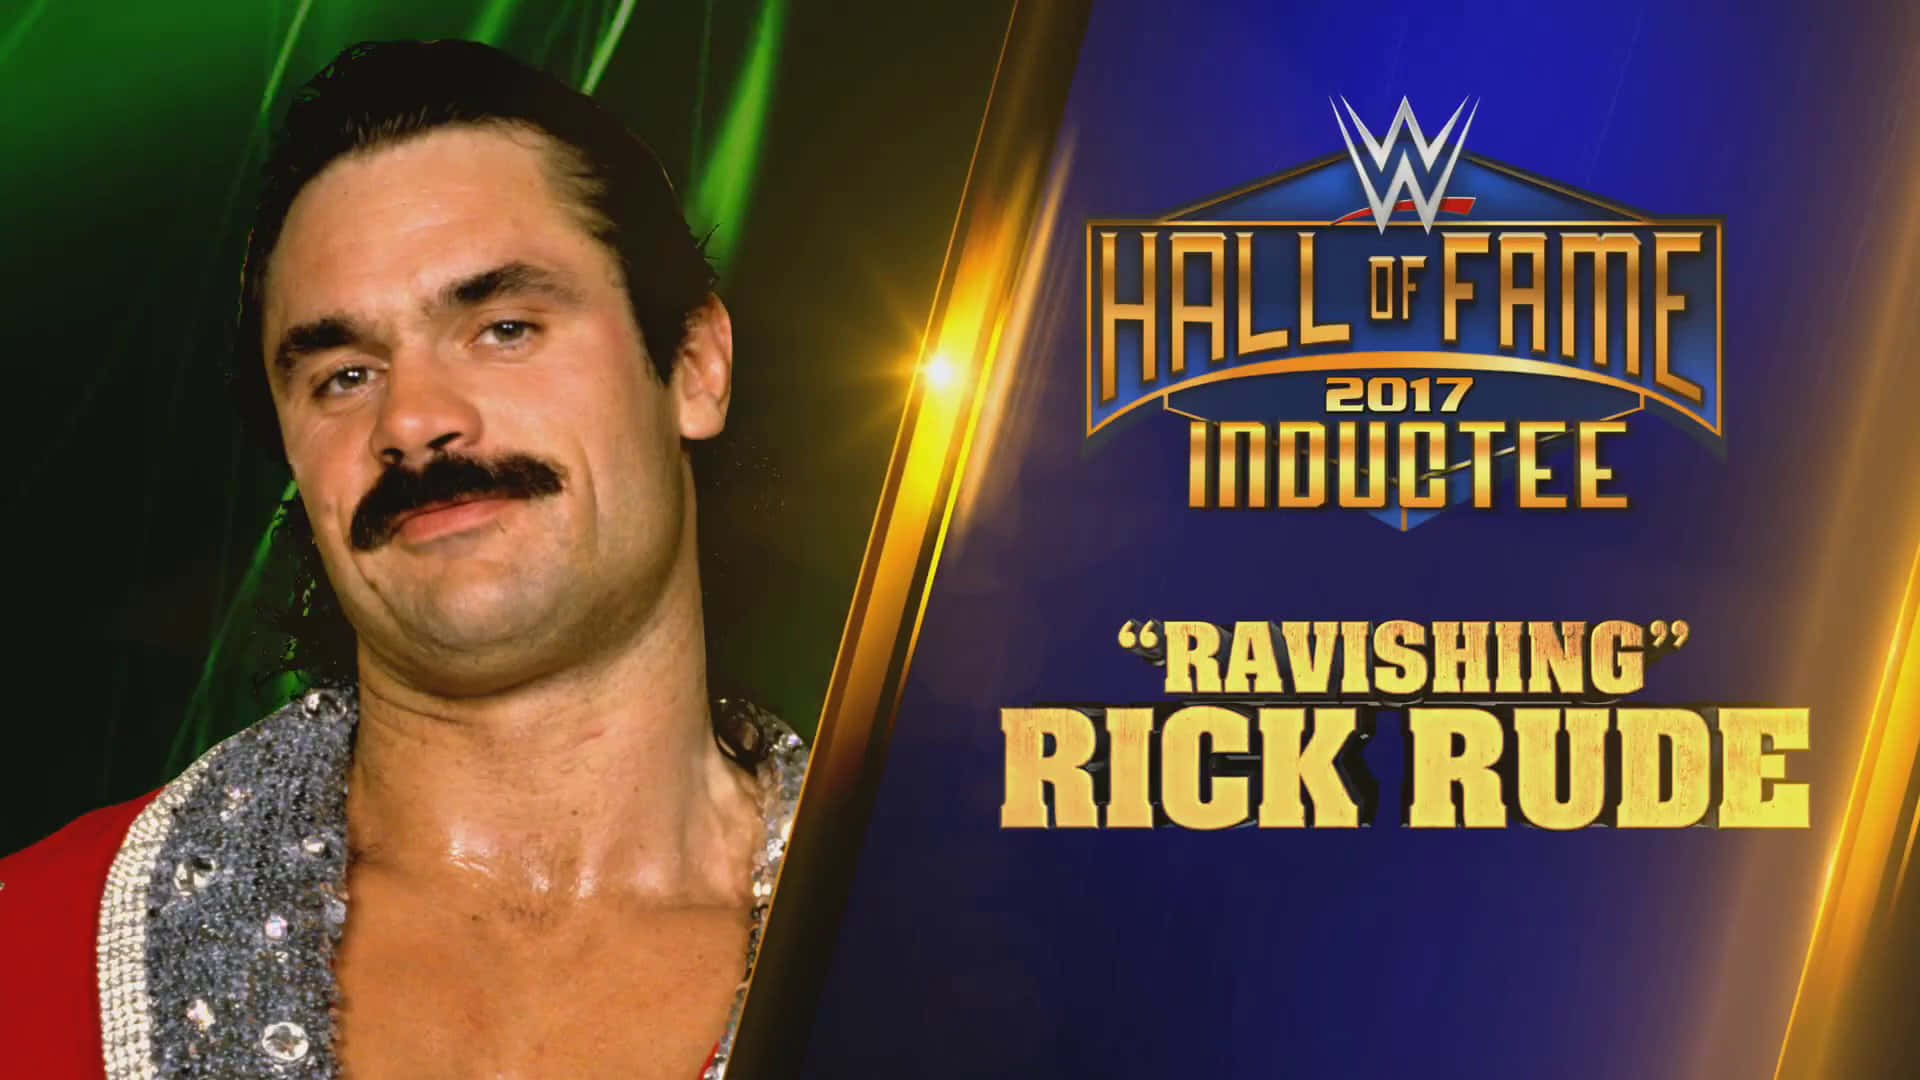 Rickrude Wwe Hall Of Fame Inductee Foto Wallpaper